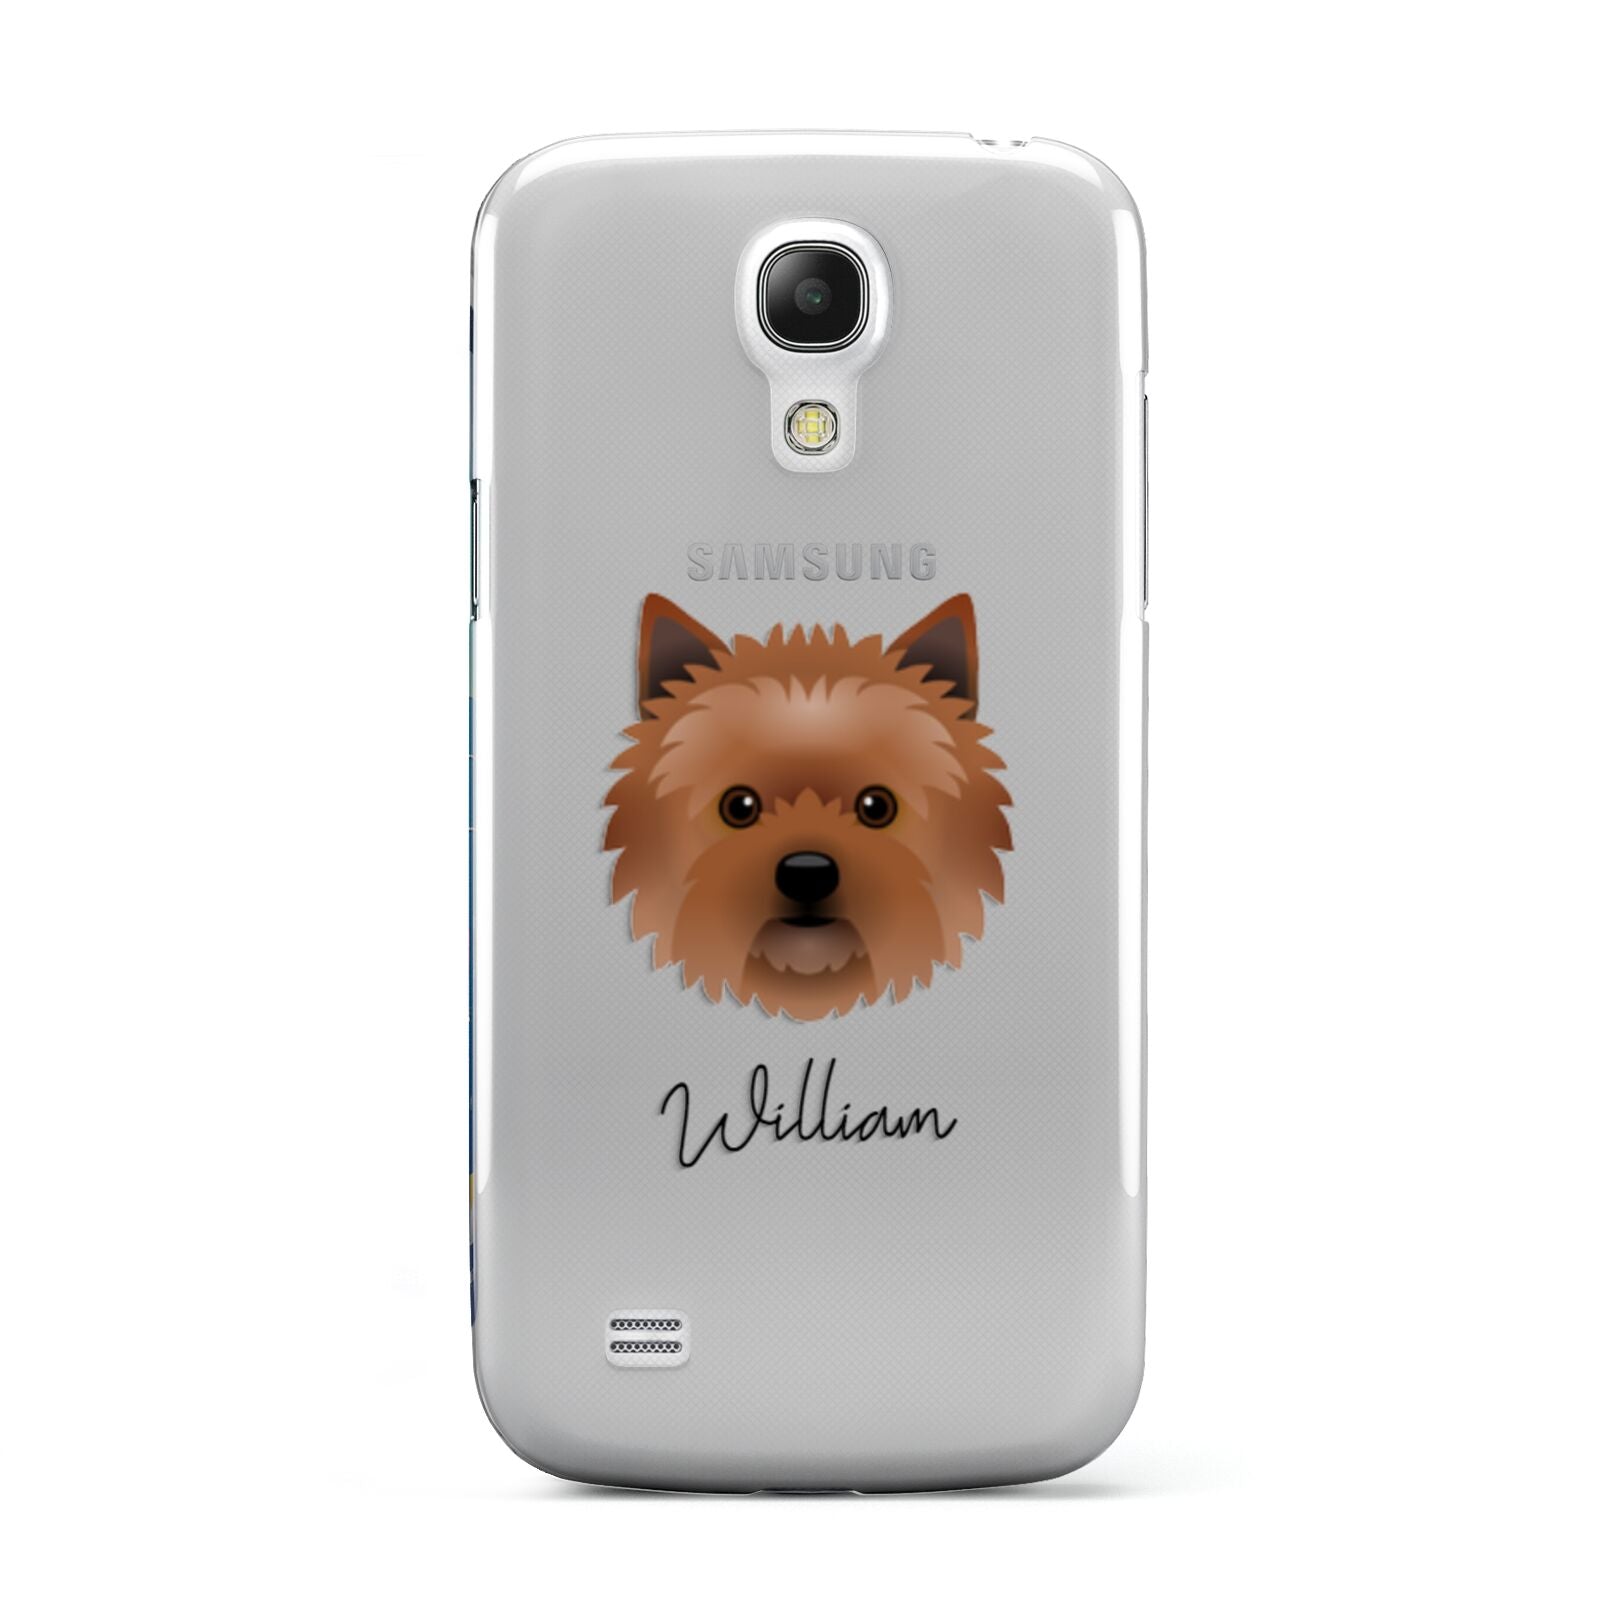 Cairn Terrier Personalised Samsung Galaxy S4 Mini Case